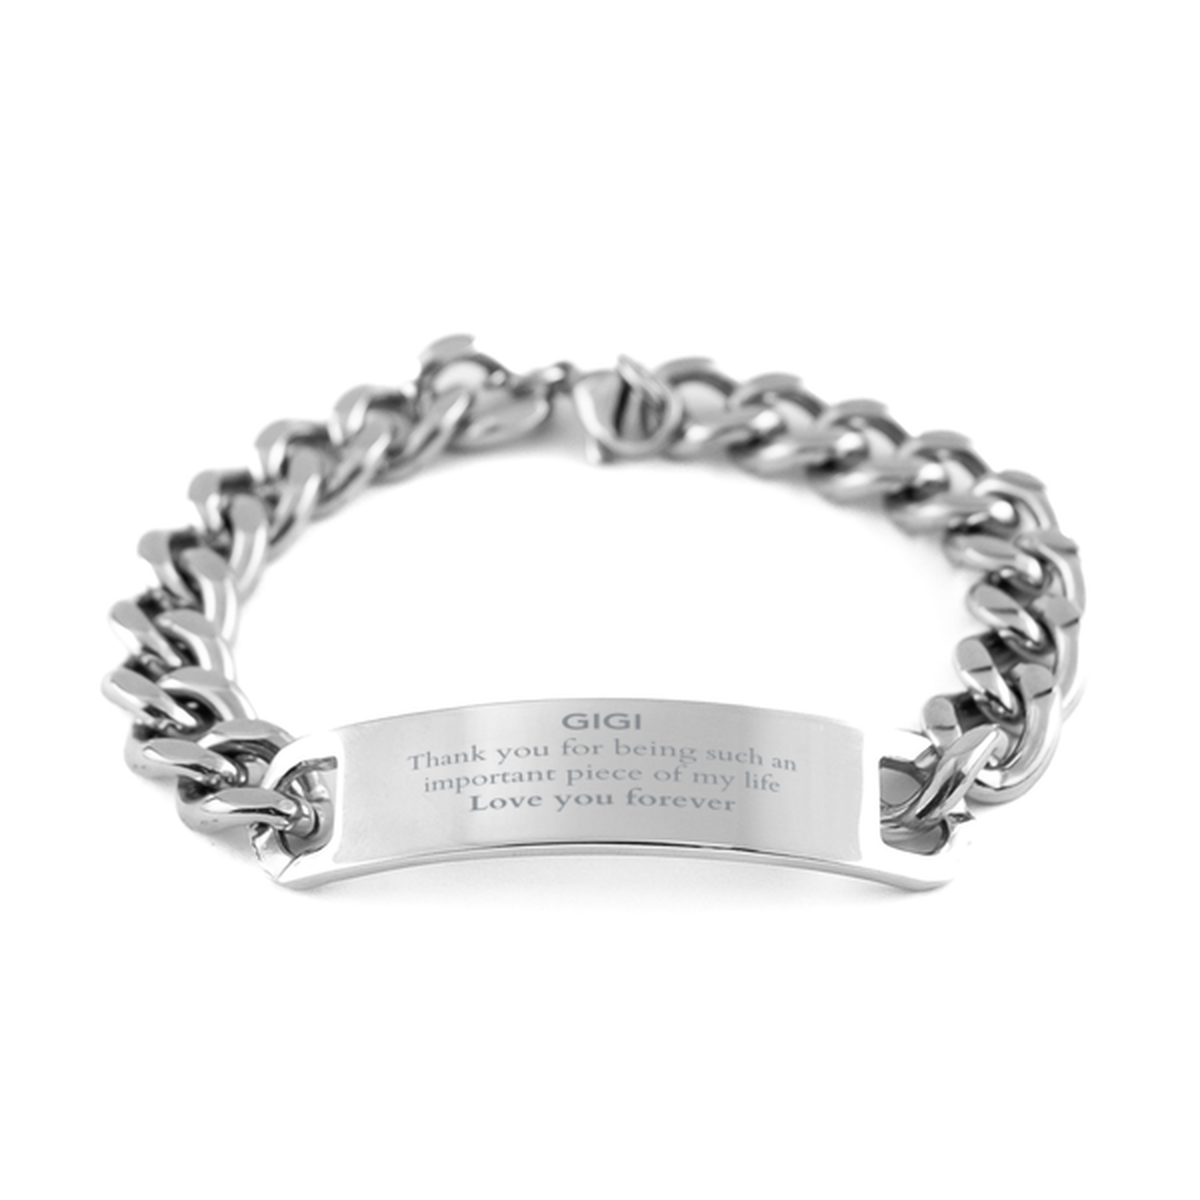 Appropriate Gigi Cuban Chain Stainless Steel Bracelet Epic Birthday Gifts for Gigi Thank you for being such an important piece of my life Gigi Christmas Mothers Fathers Day